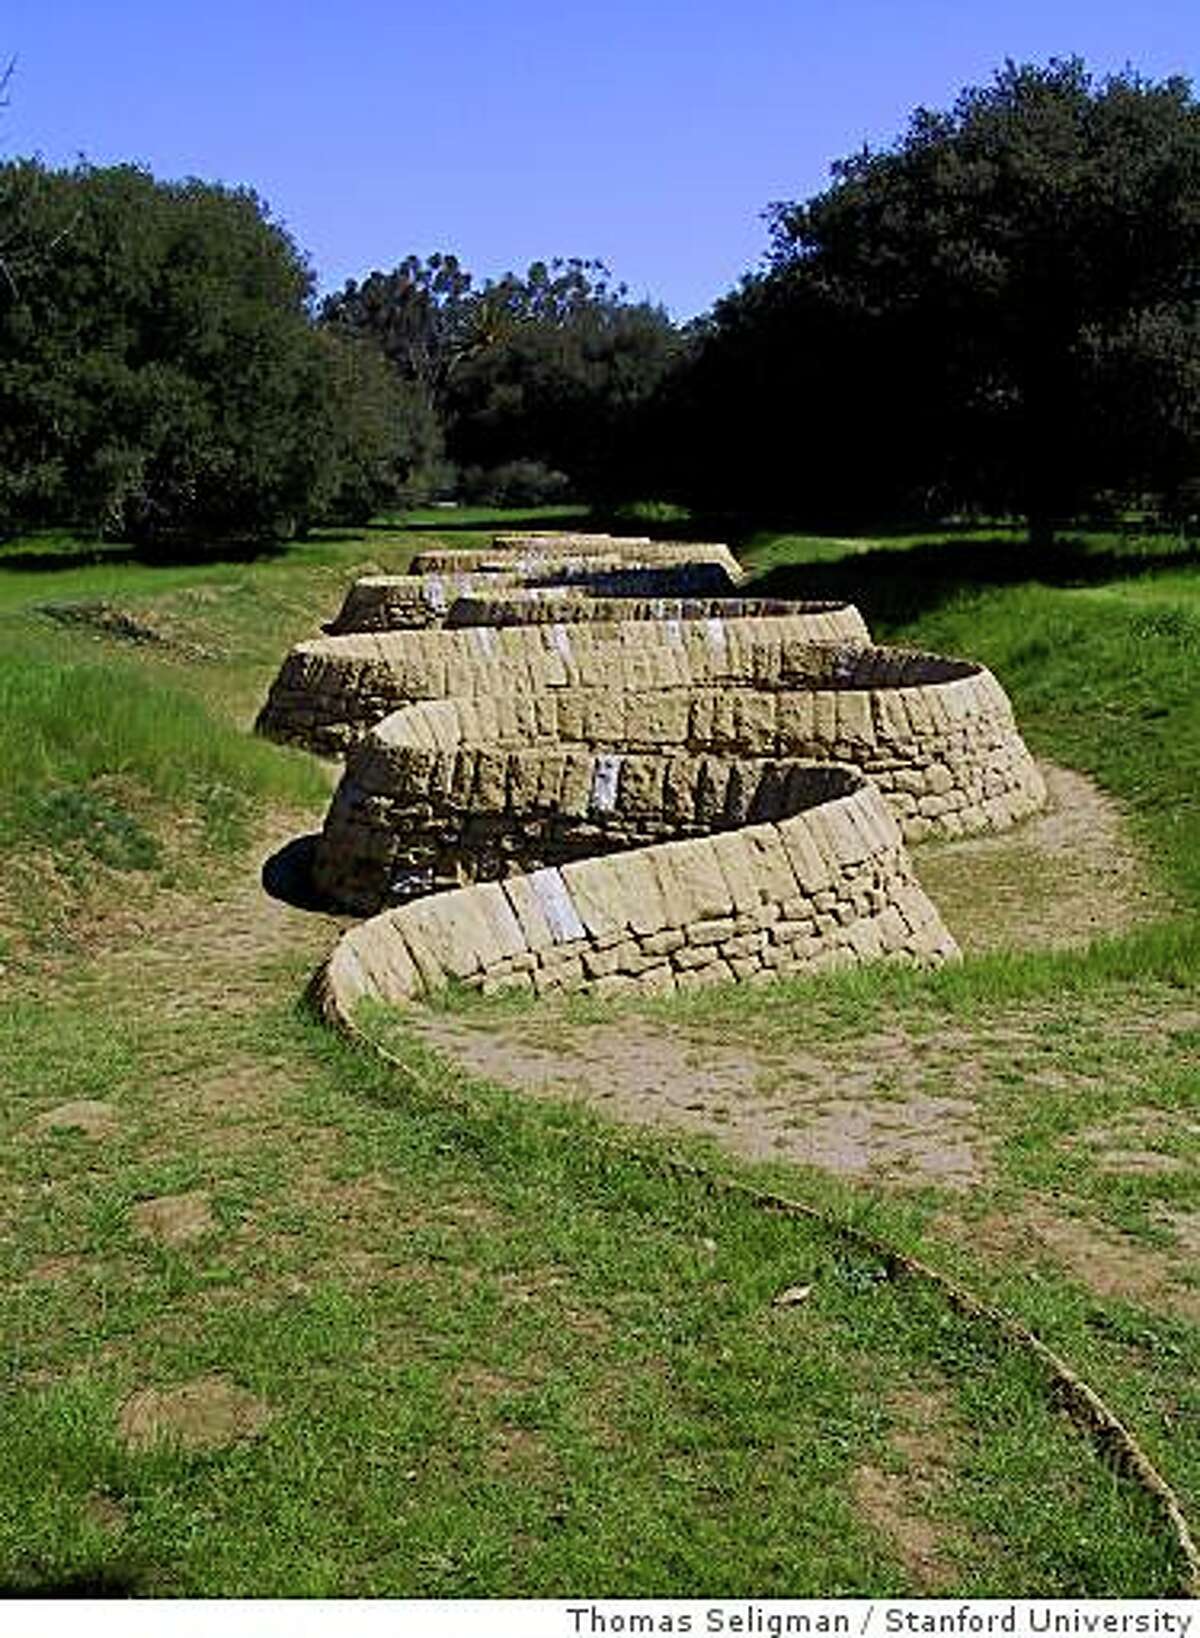 Andy Goldsworthy's "Stone River'' snakes across the Stanford University campus.